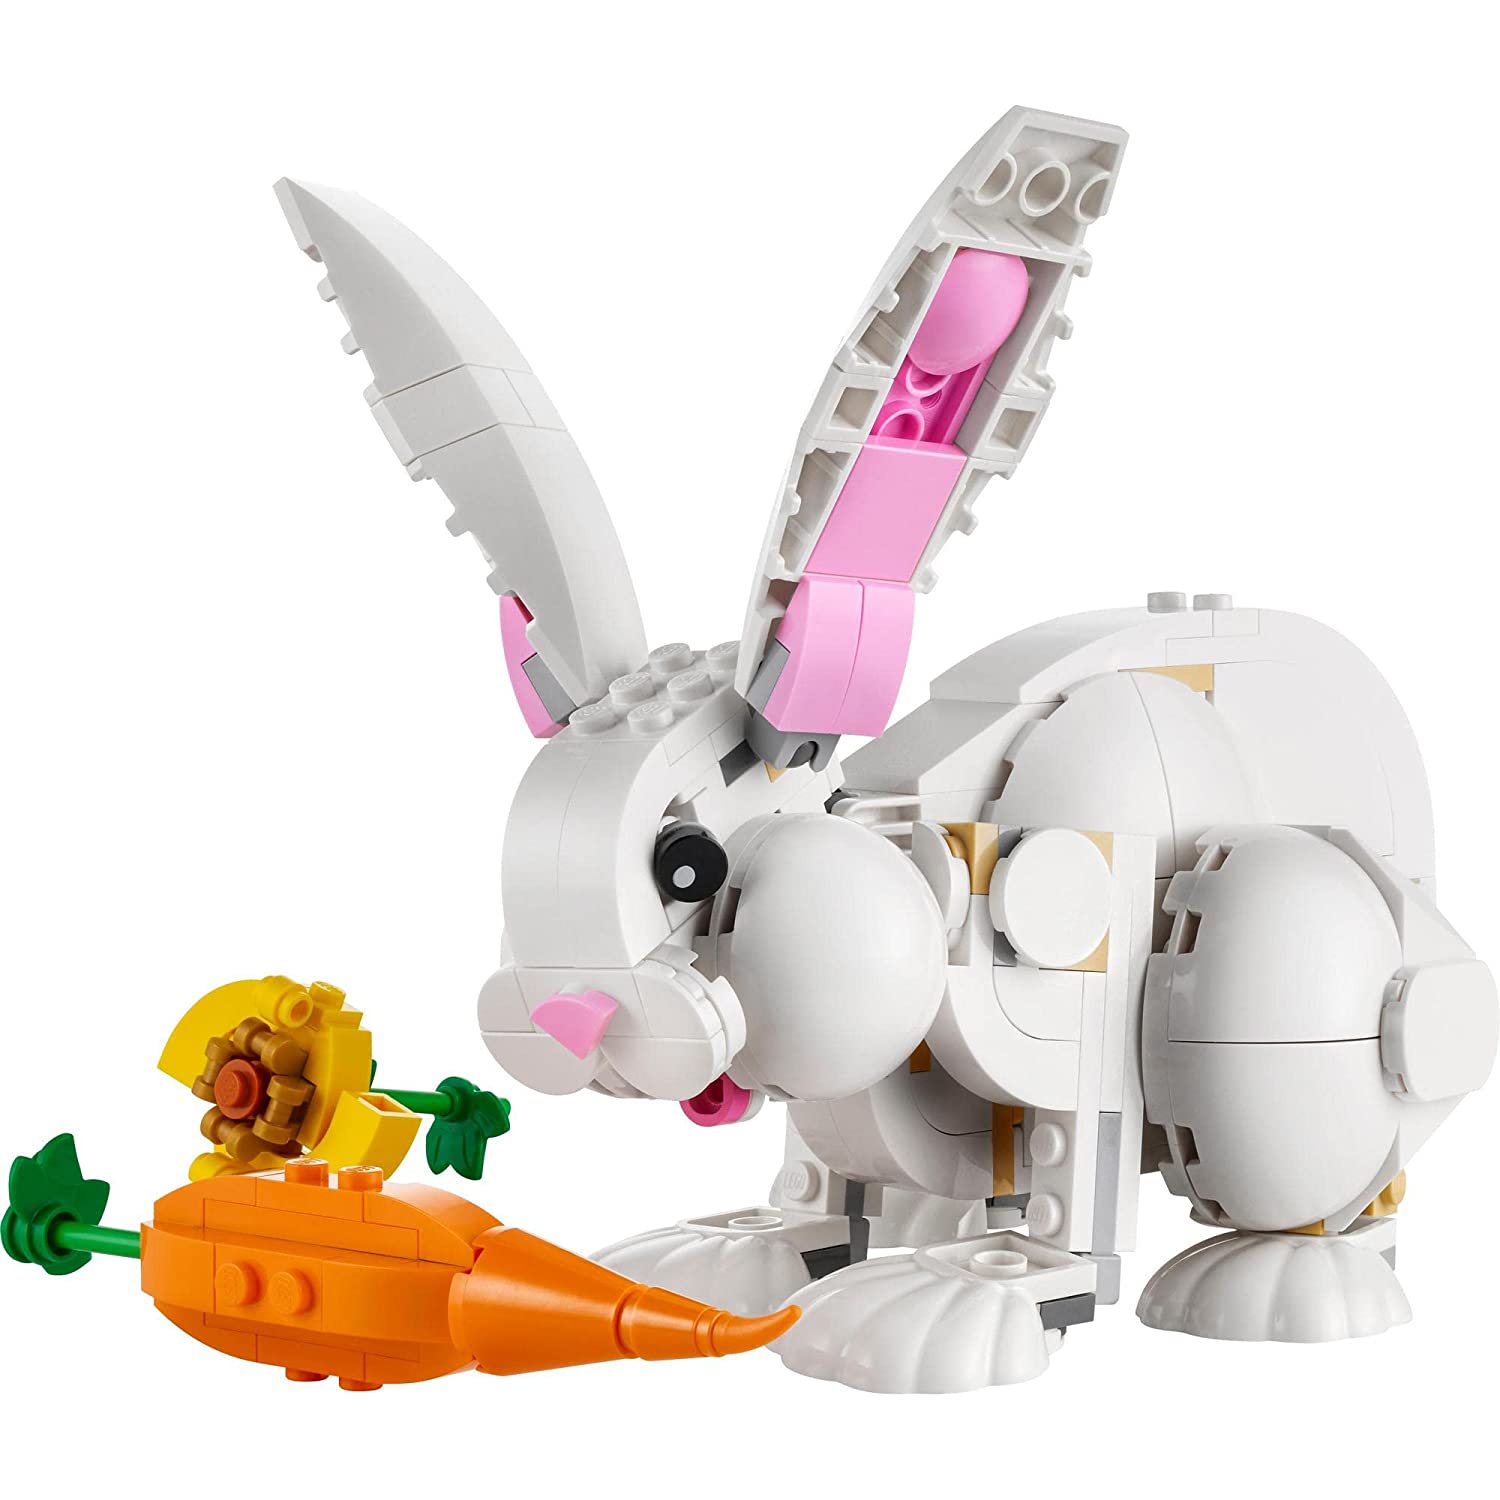 LEGO Creator 3in1 White Rabbit Building Kit For Ages 8+